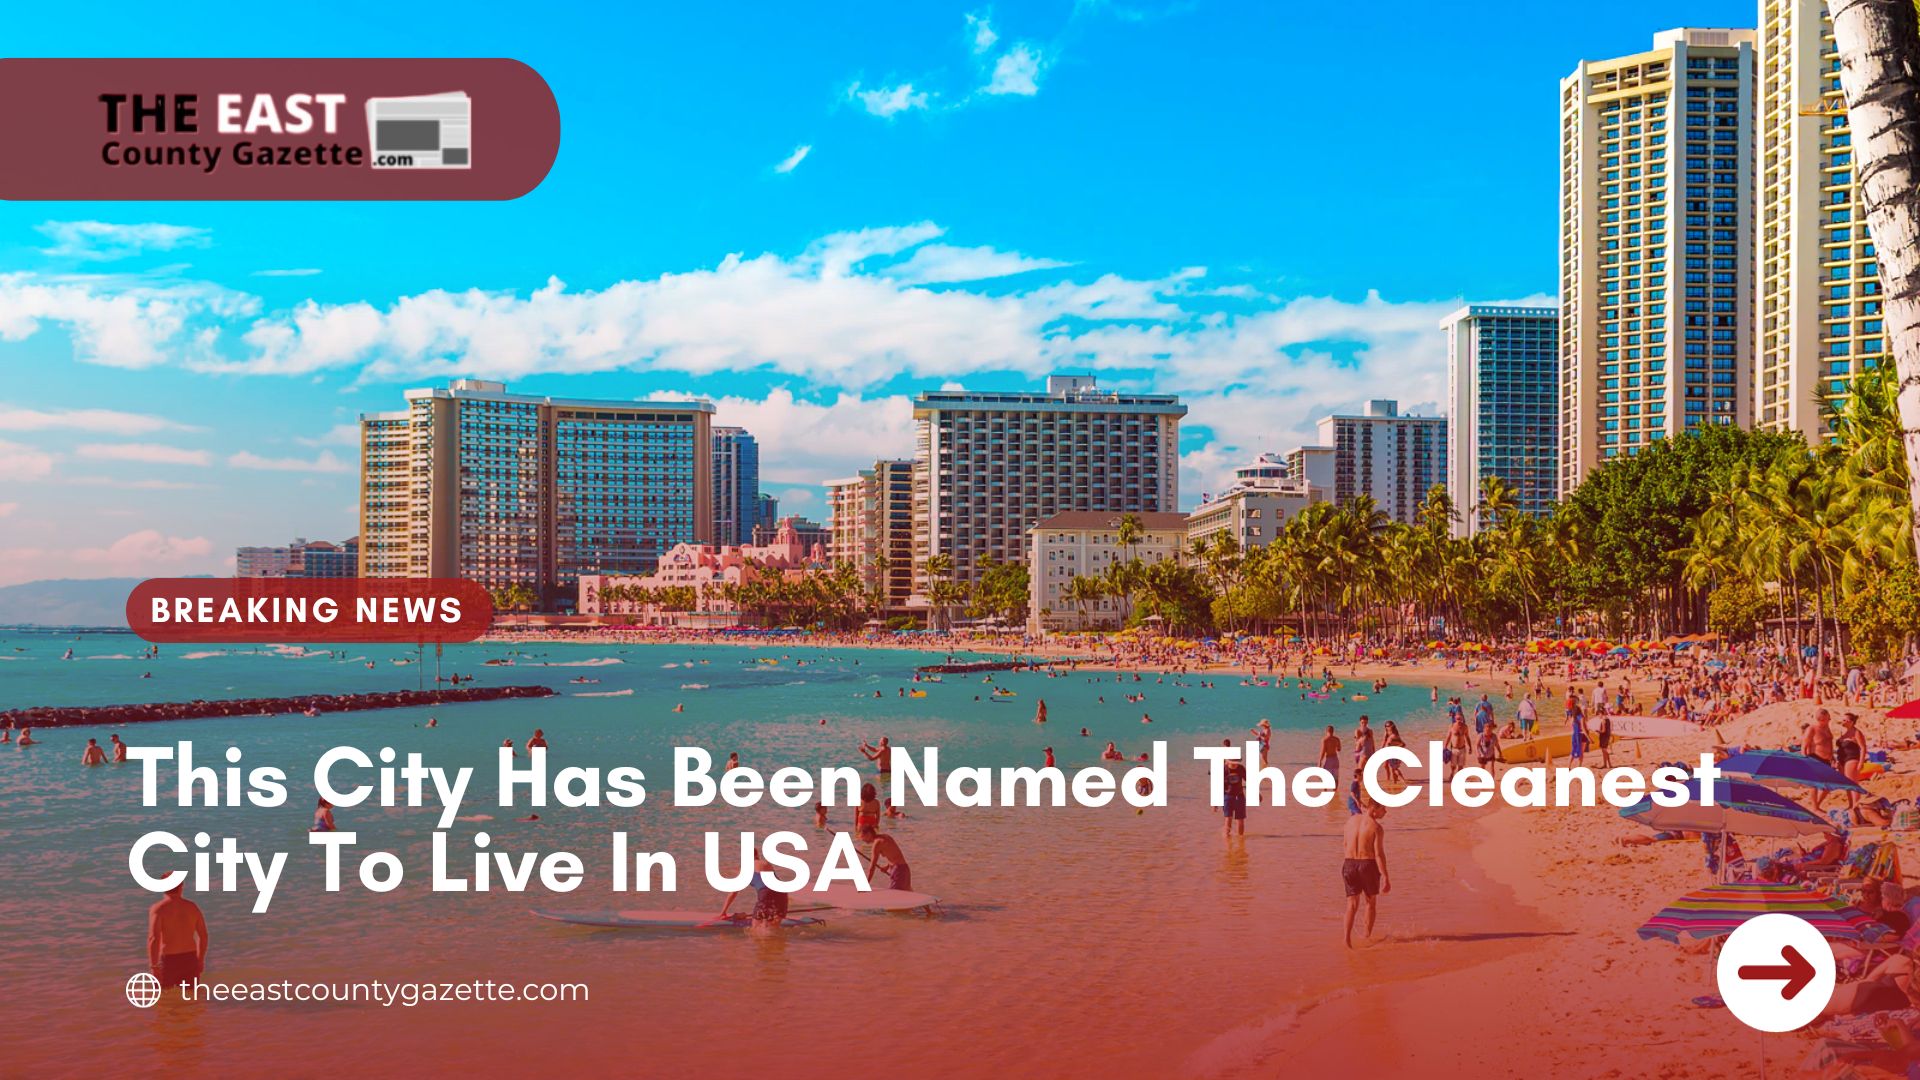 This City Has Been Named The Cleanest City To Live In the USA